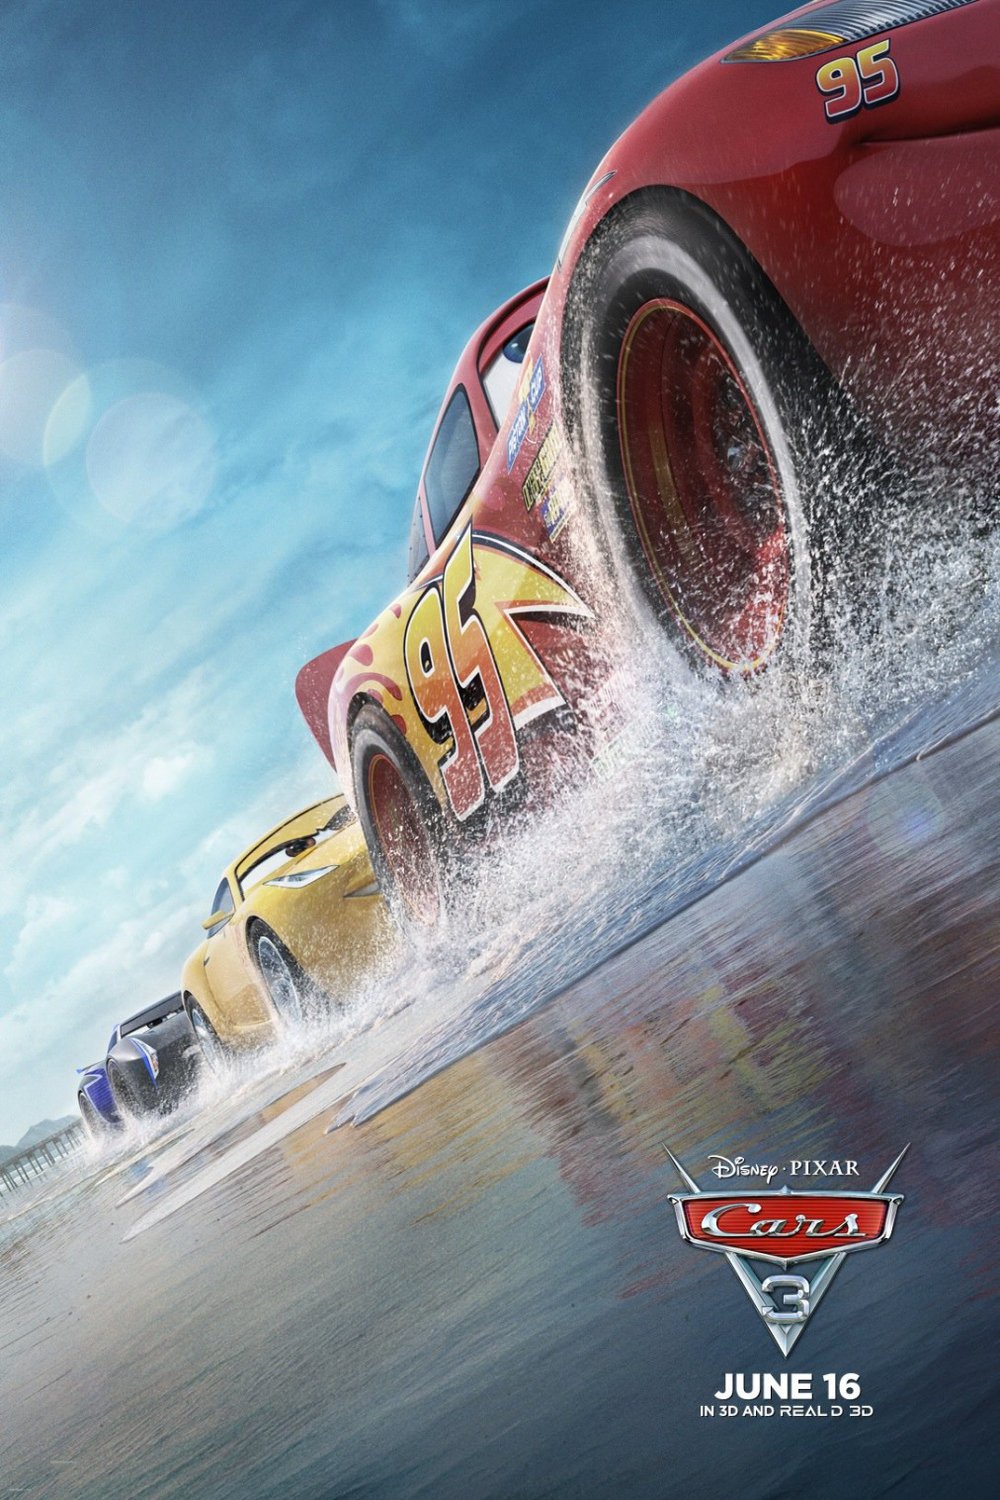 Poster of the movie Cars 3